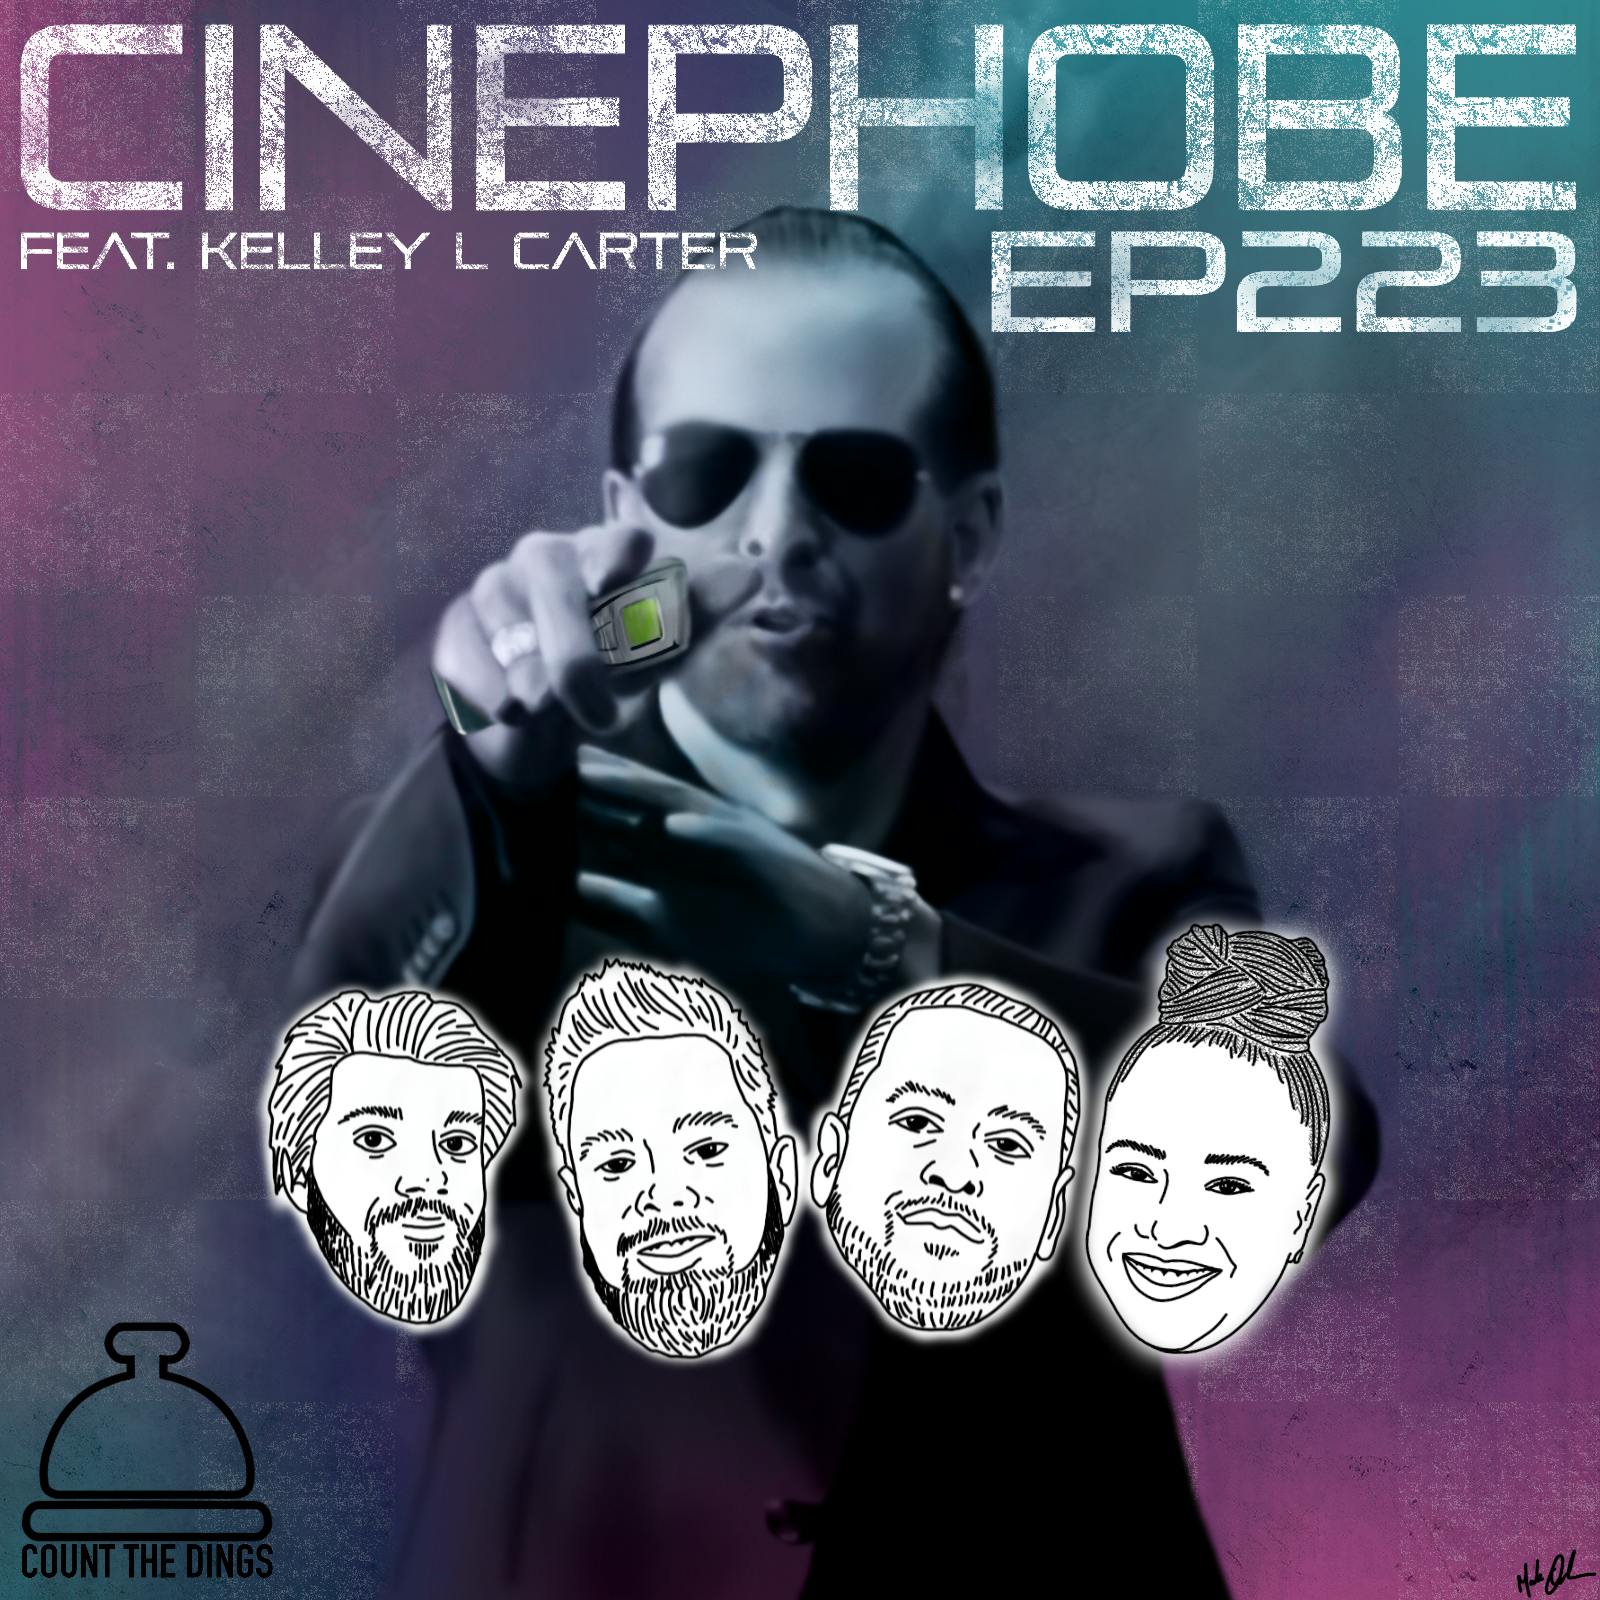 Cinephobe Ep 223: Bad Company - Part 2 (with Kelley L. Carter)